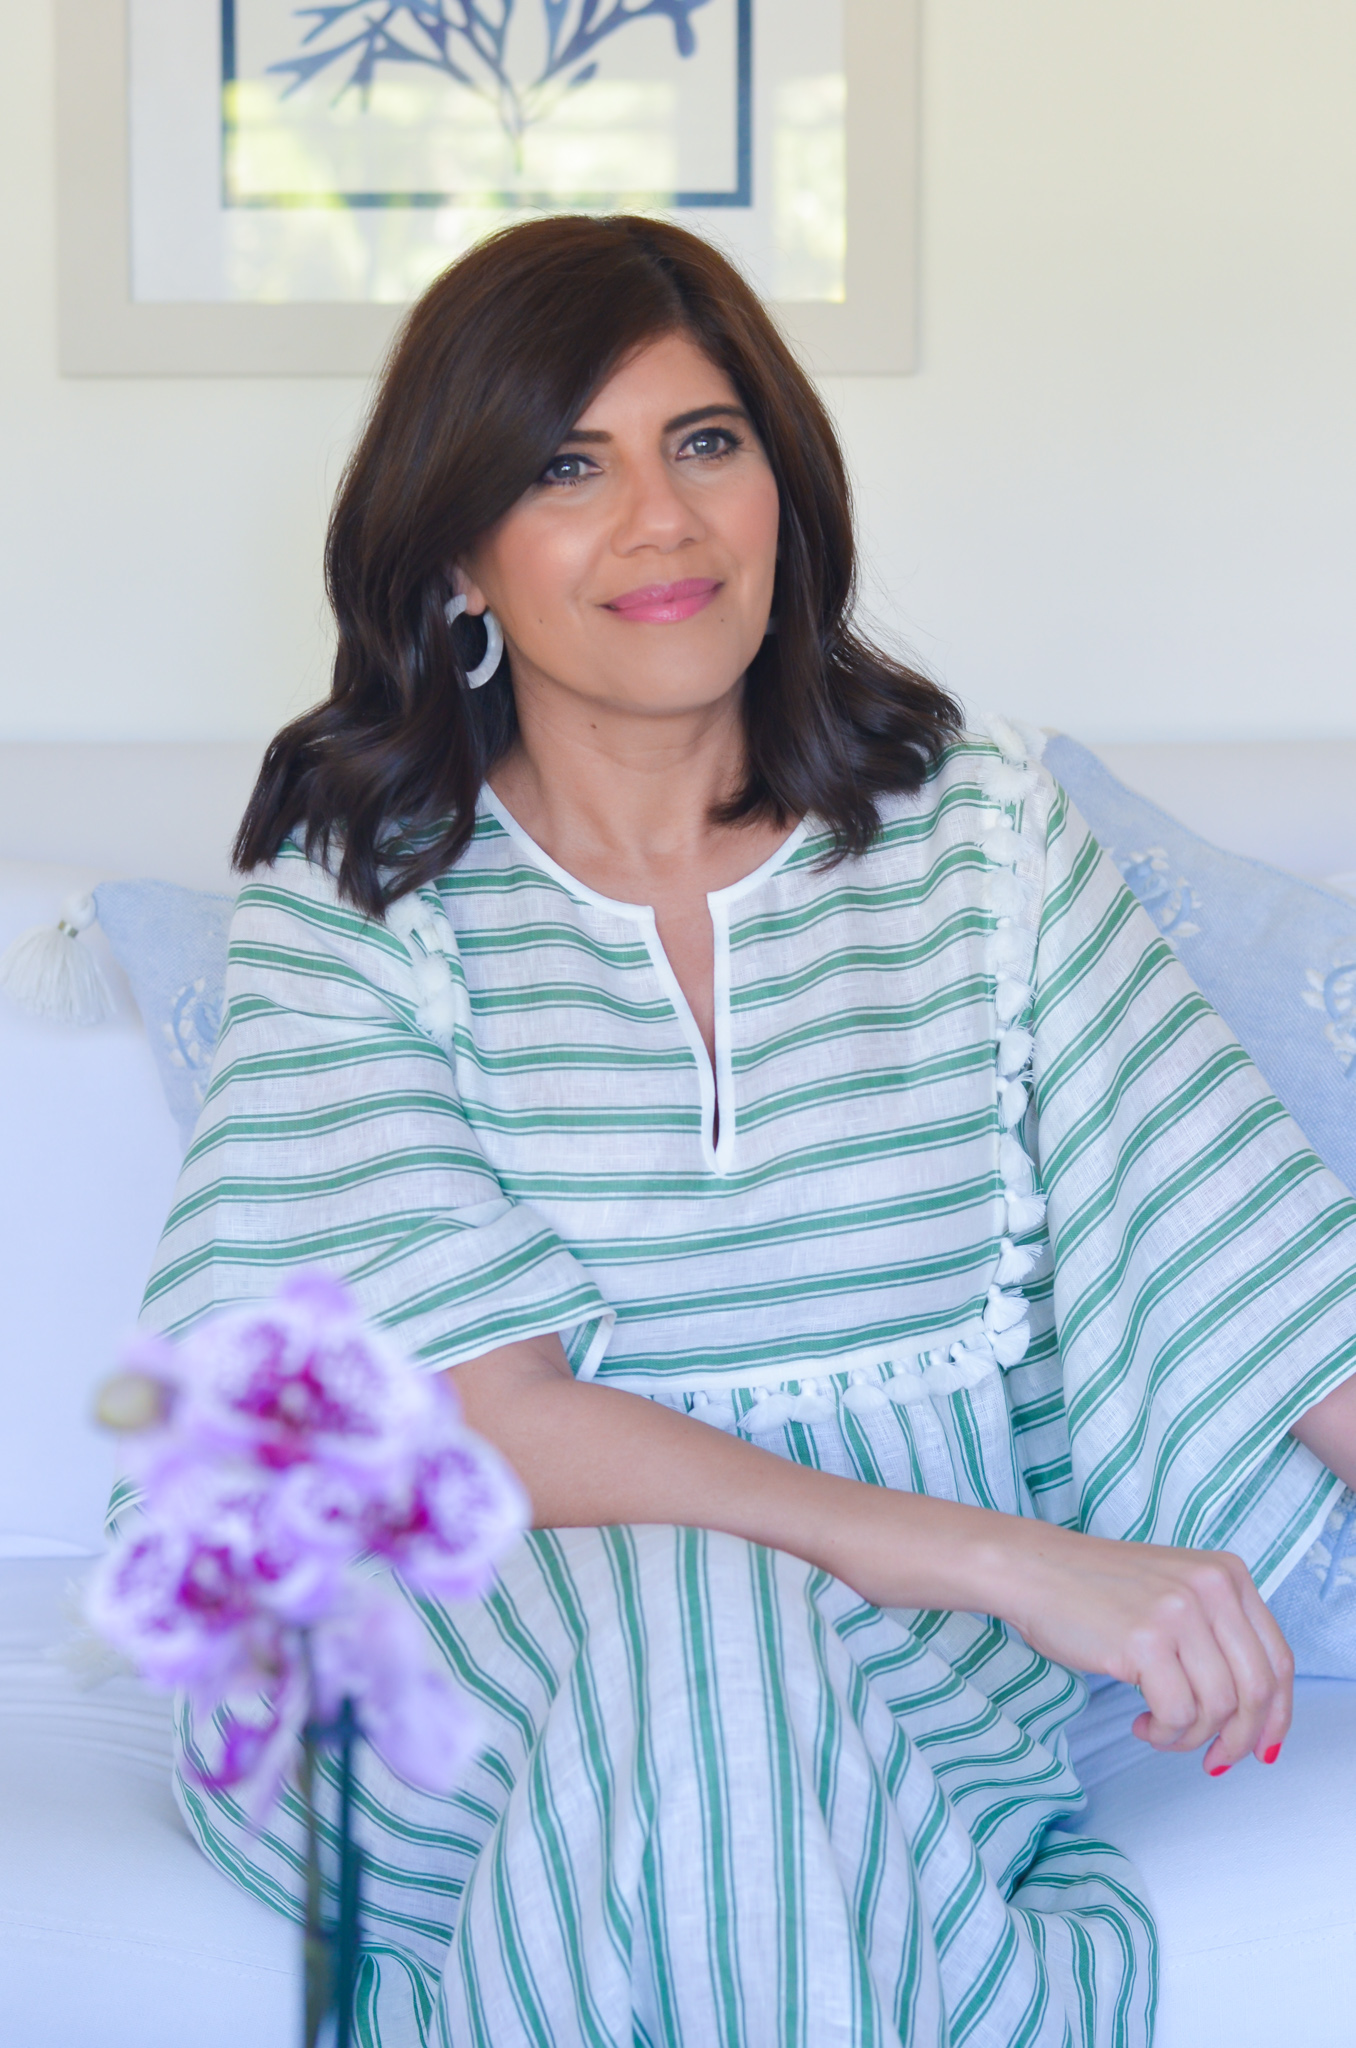 Desiree leone of Beautifully Seaside featuring new beauty buys for her 50th birthday